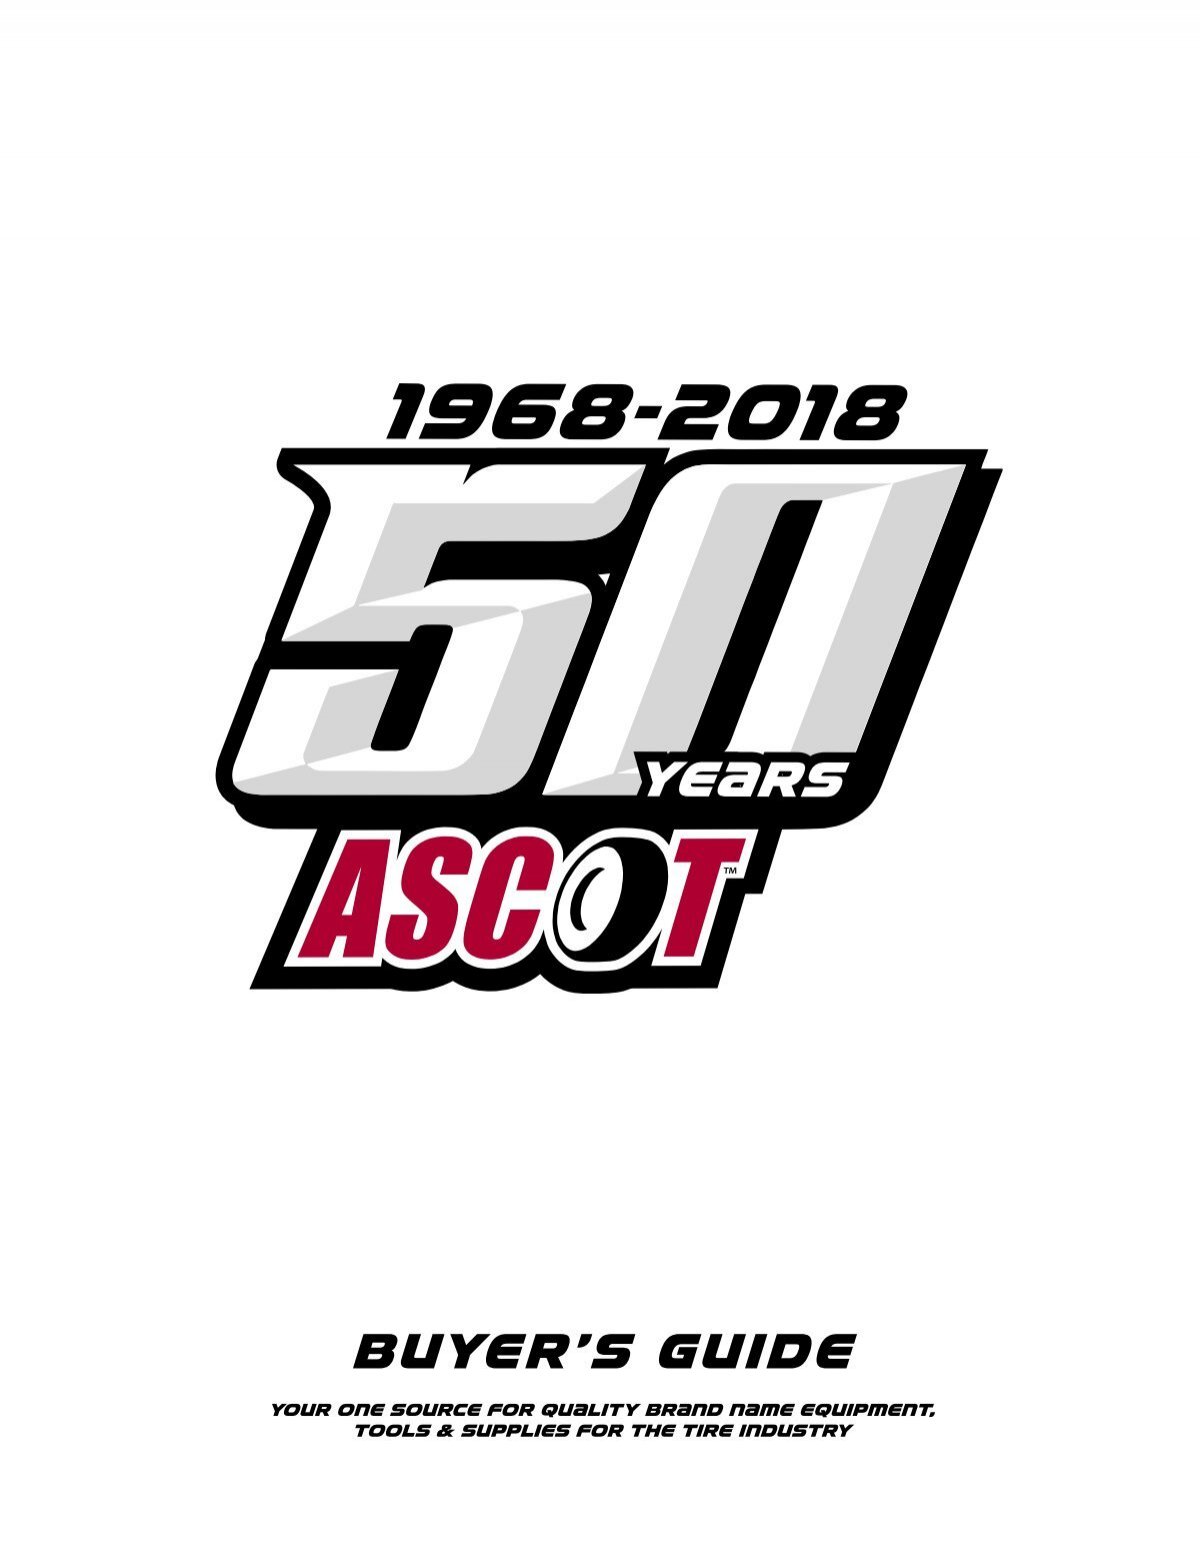 2018 Ascot Buyer's Guide_compressed